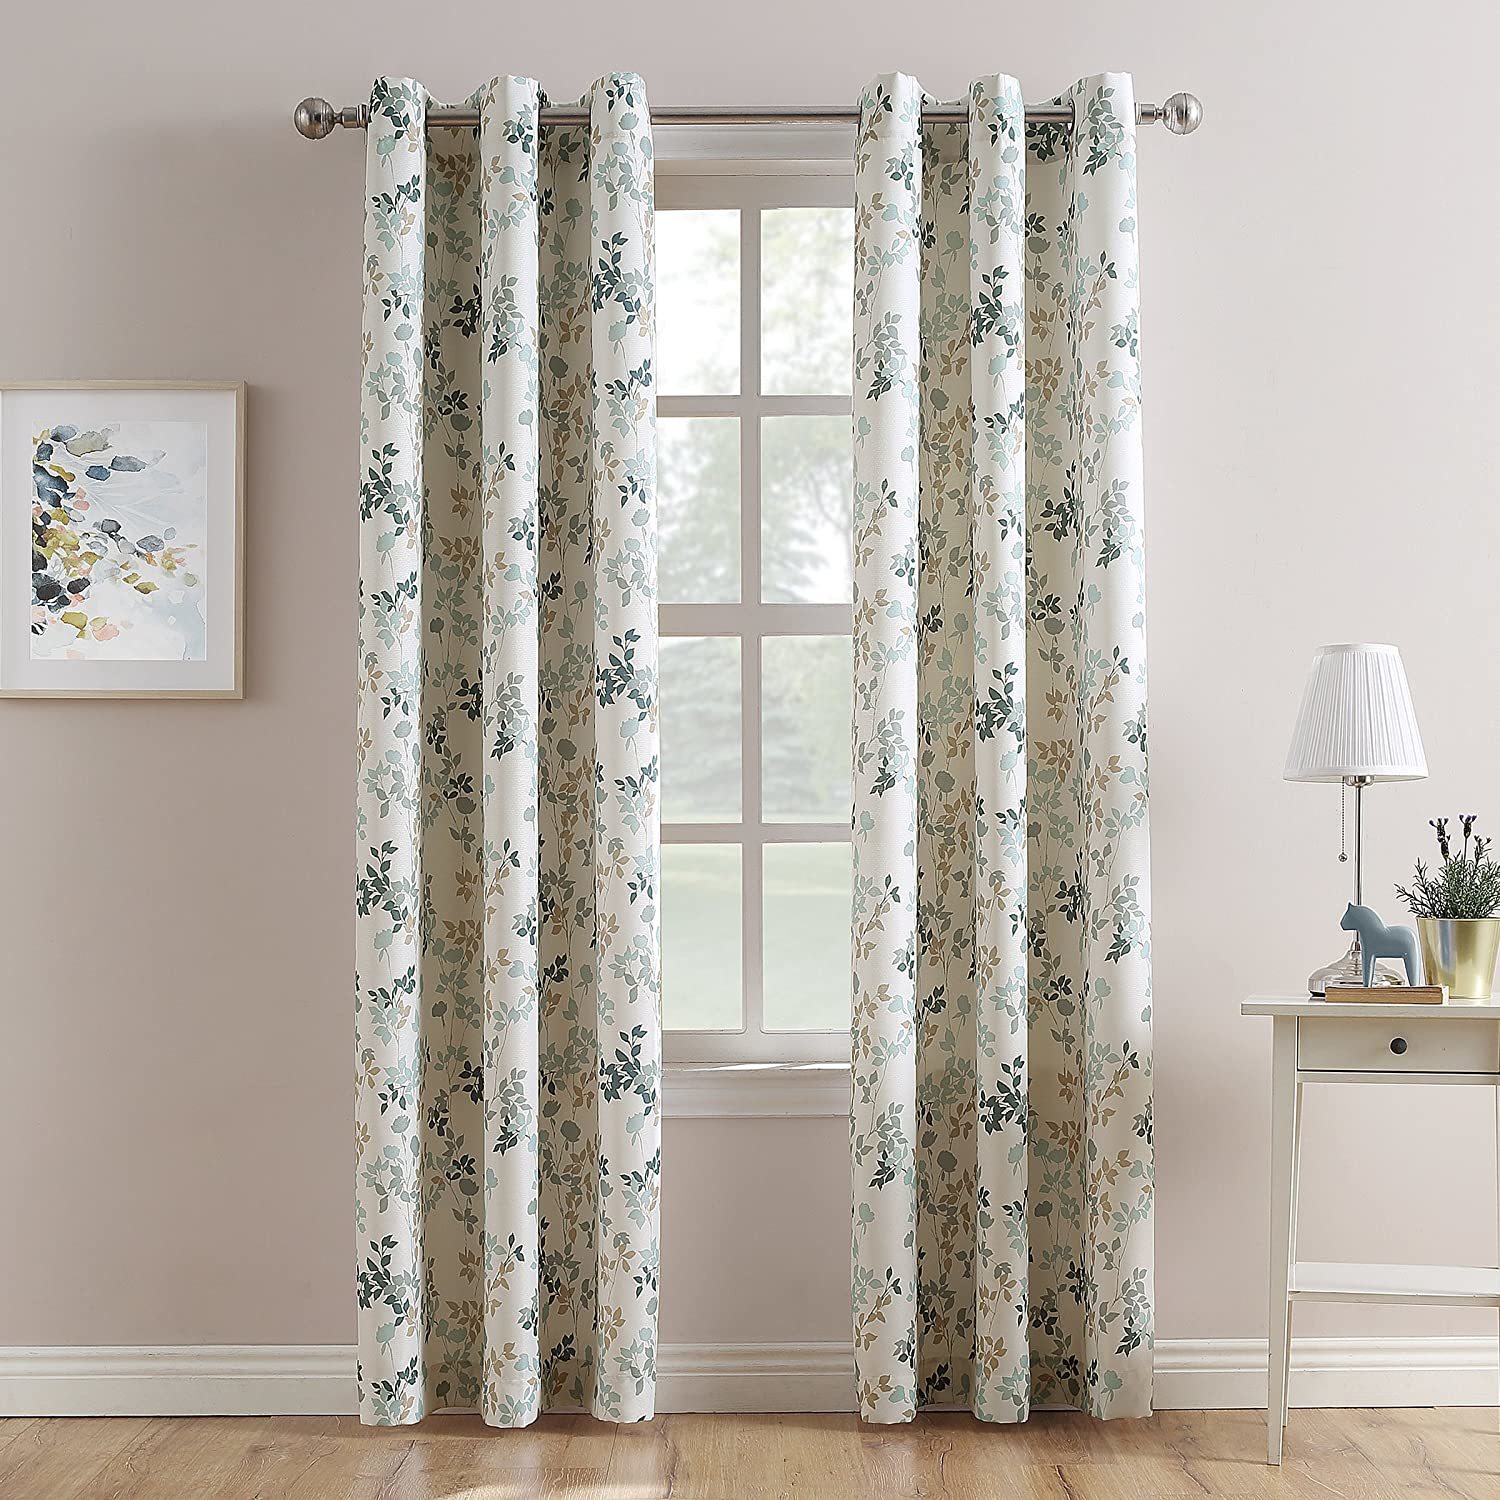 Primary image for No. 918 Harbor 48" X 84" Marra Floral Print Semi-Sheer Grommet Curtain Panel.